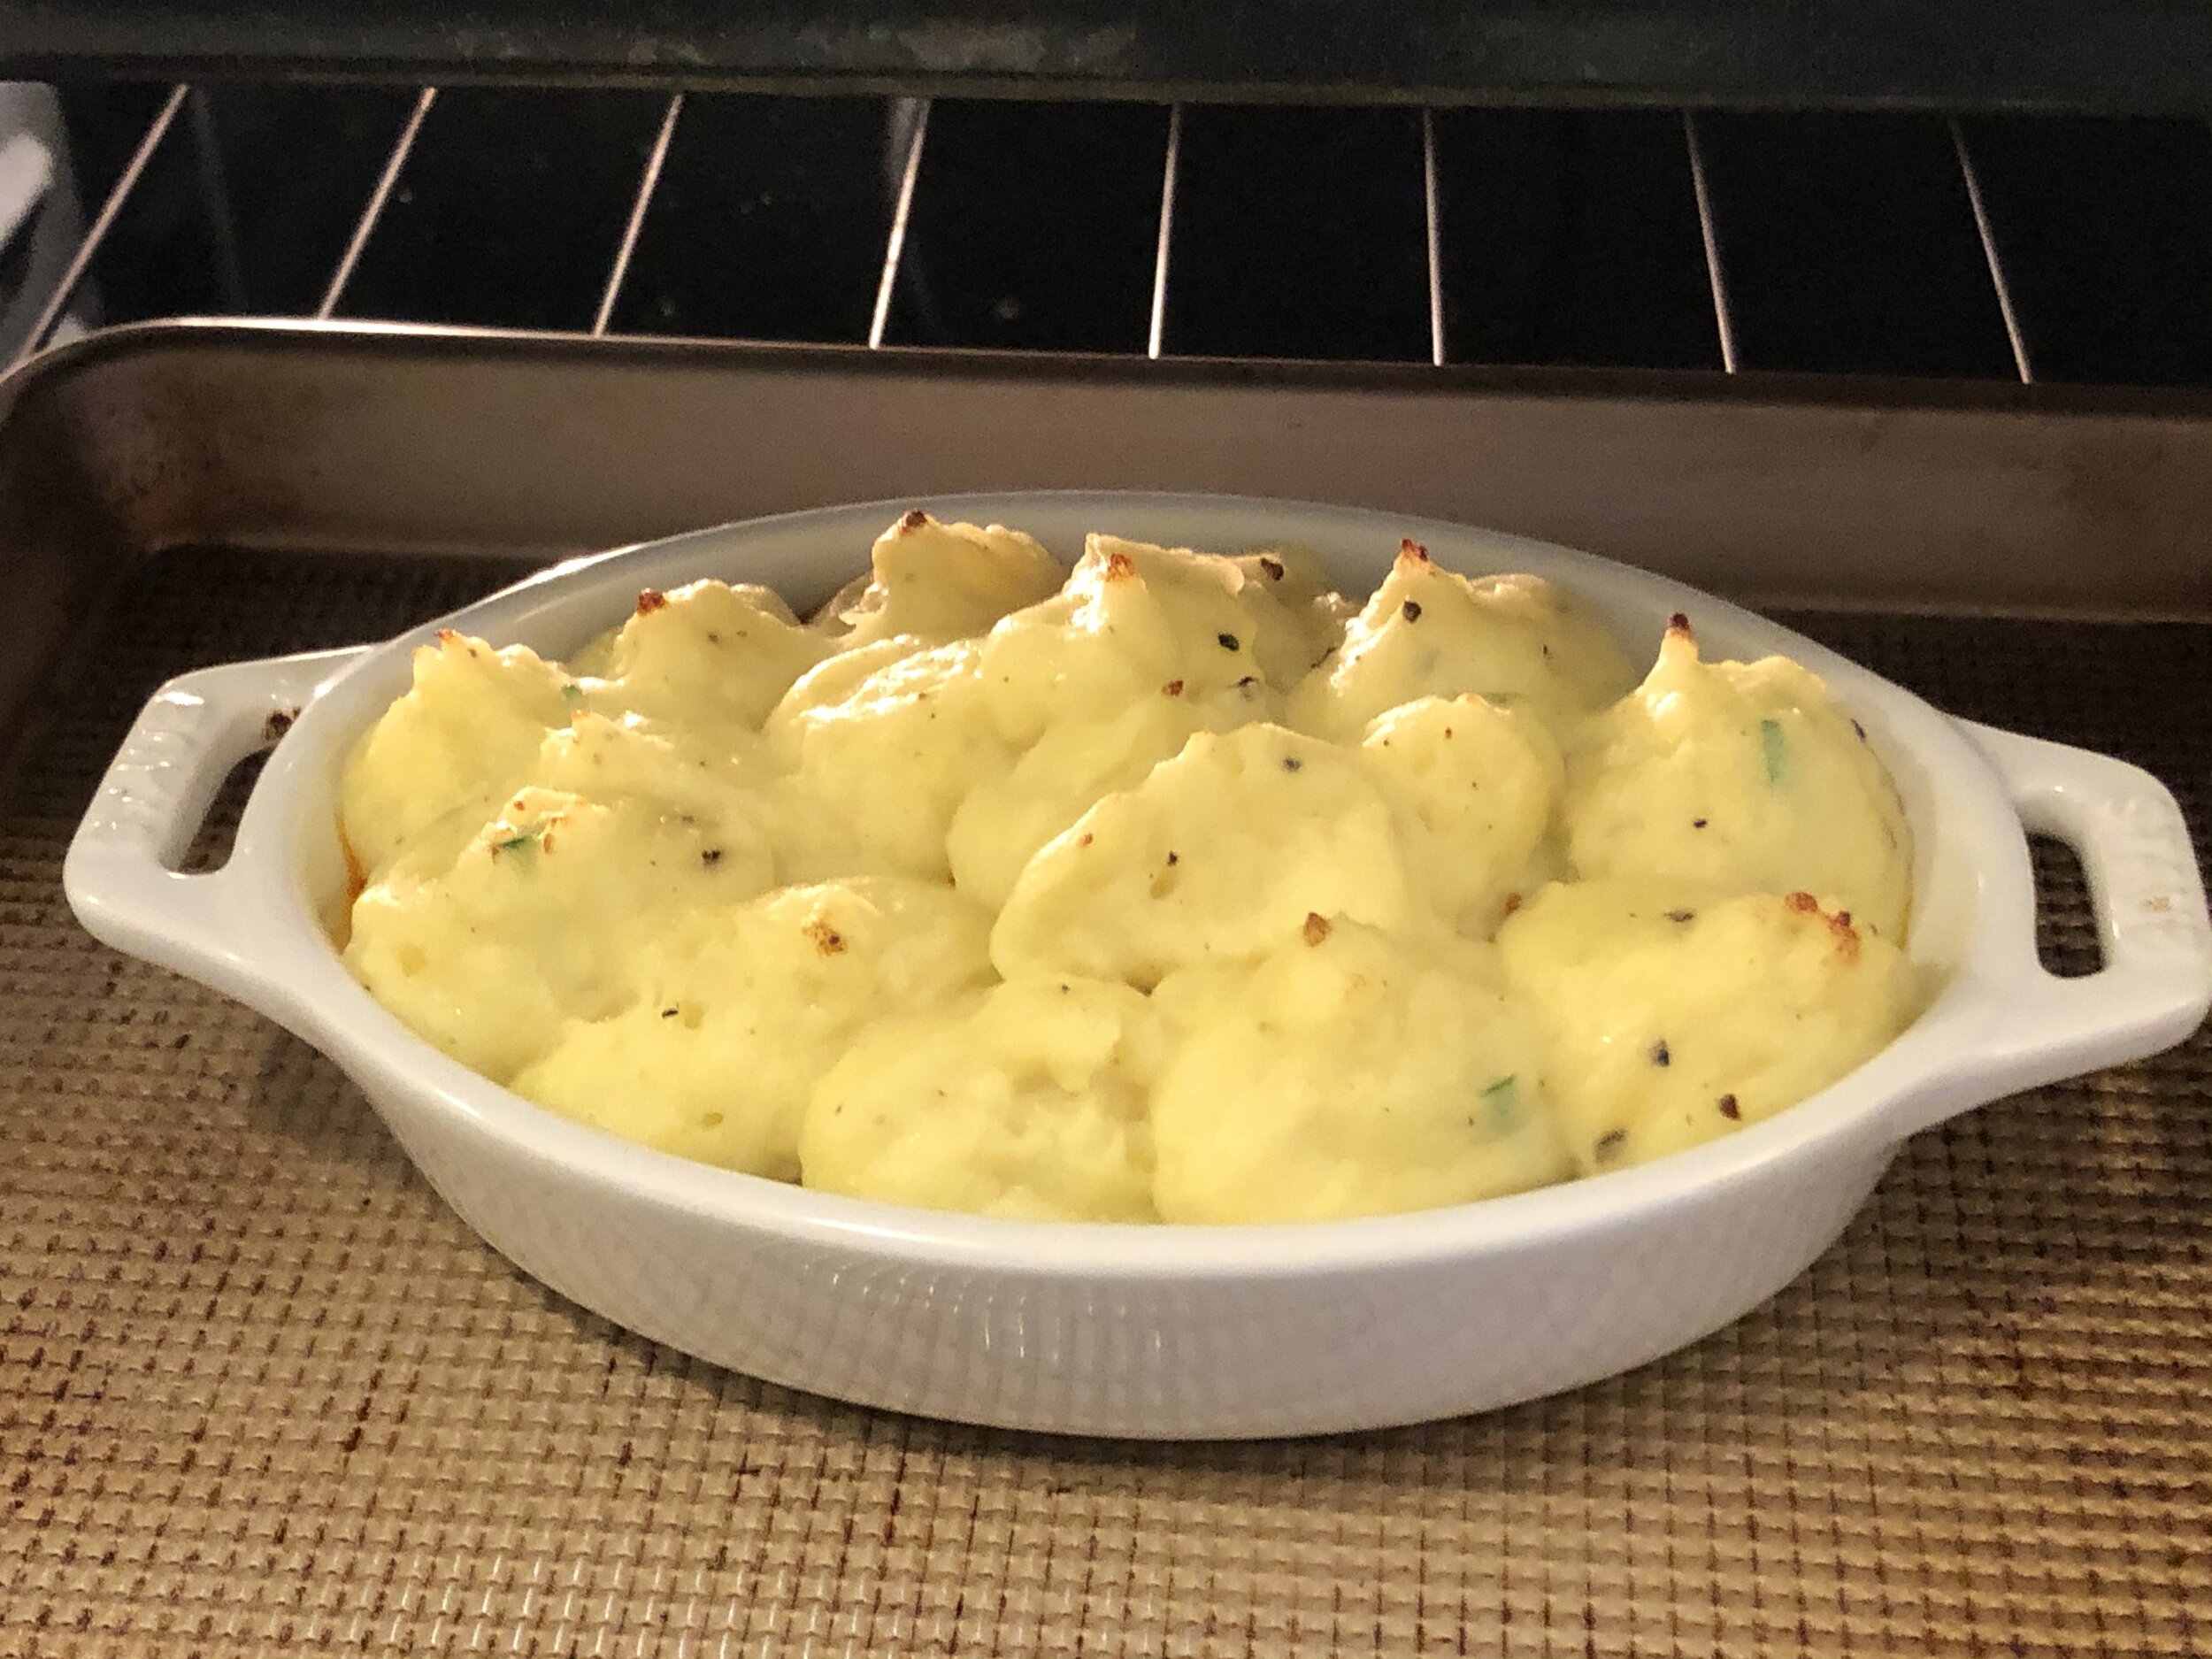 The Best Classic Shepherd's Pie - The Wholesome Dish